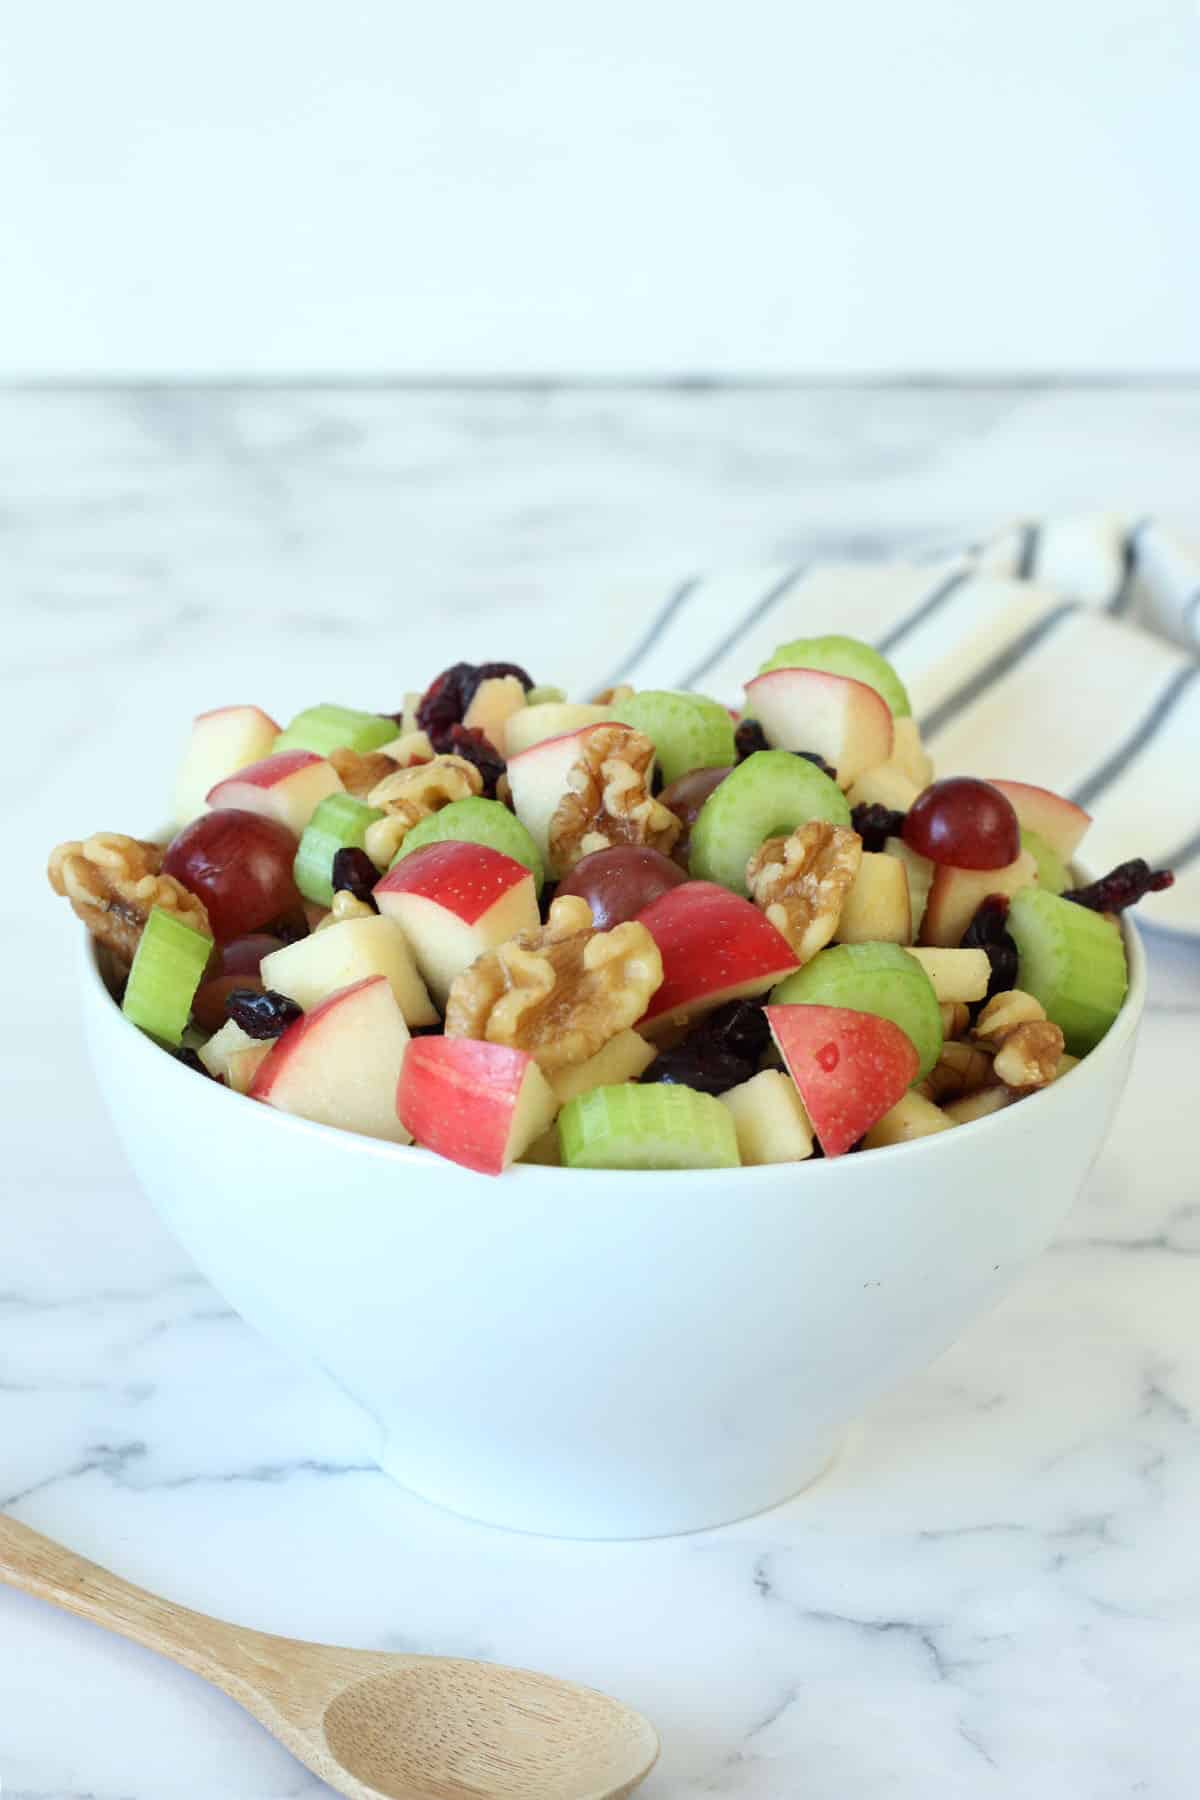 apples, celery, grapes and walnuts in a white bowl